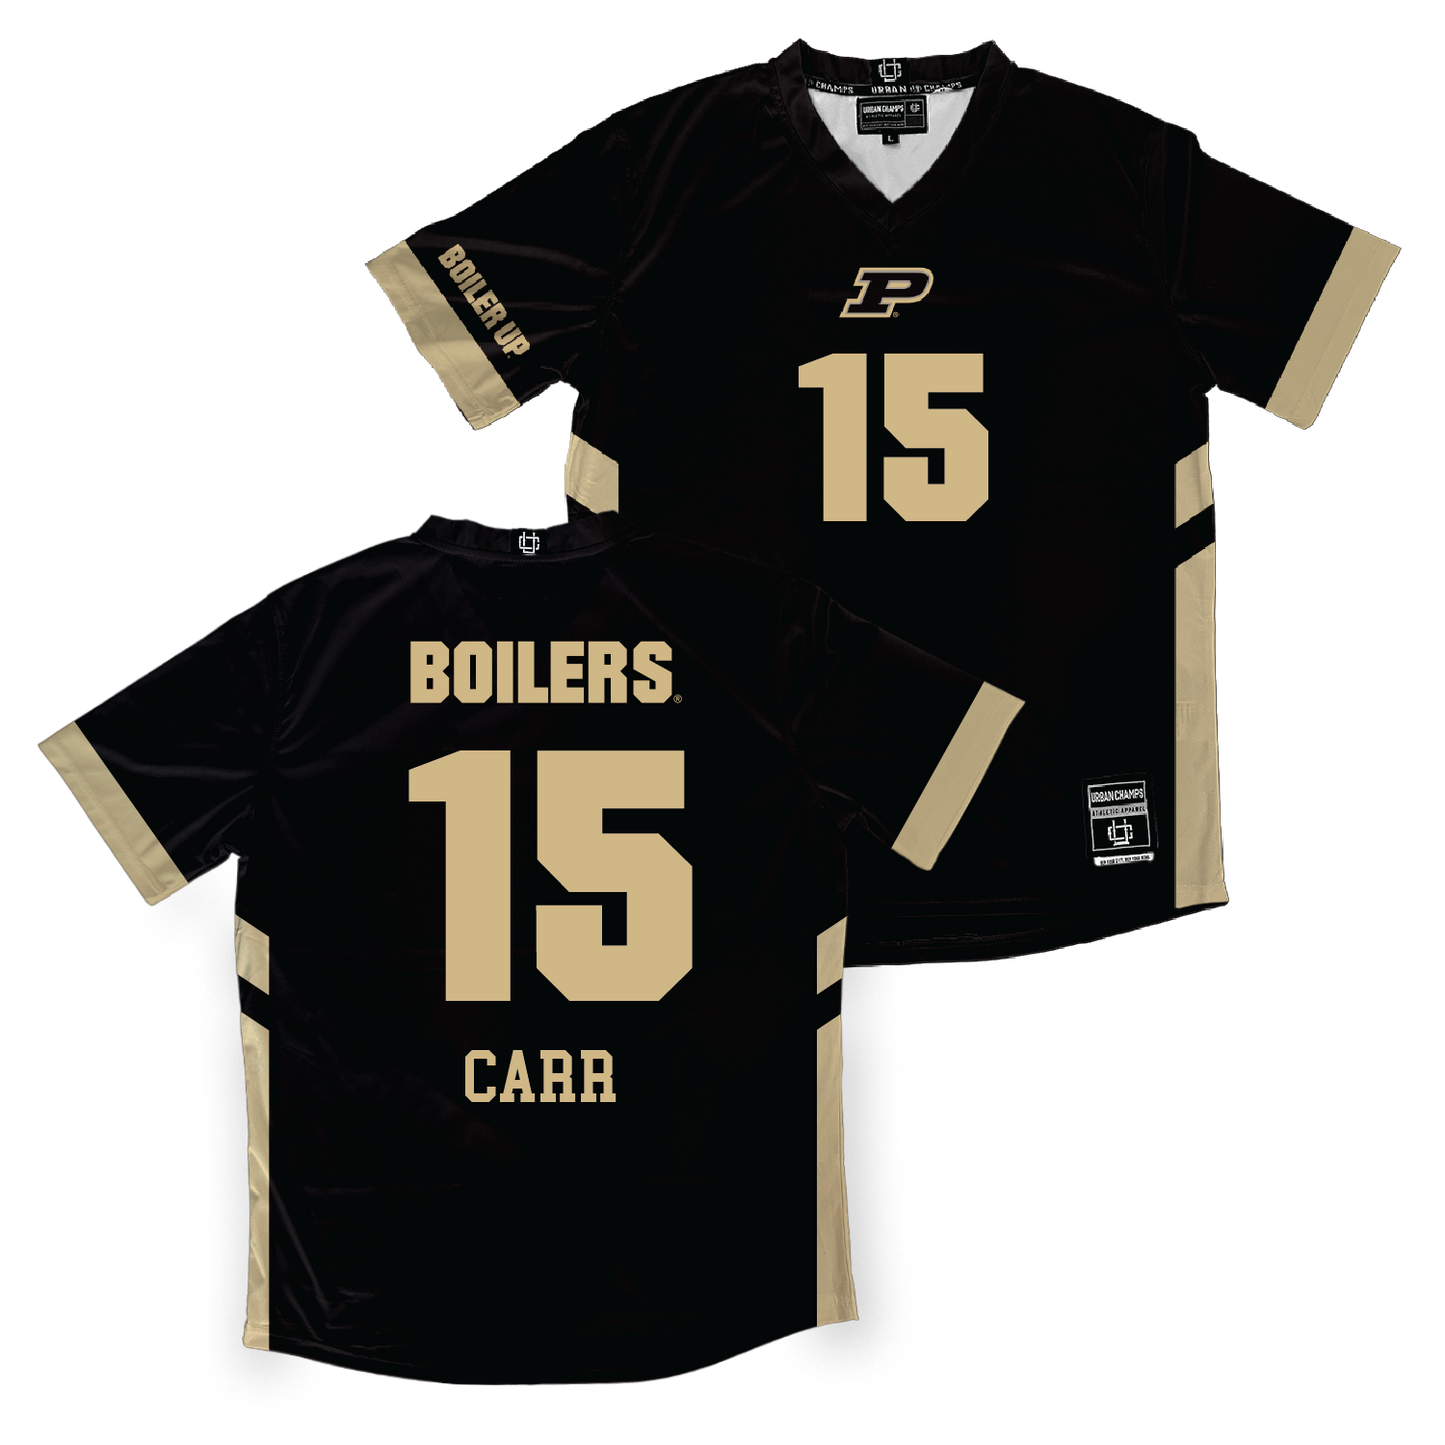 Black Purdue Women's Volleyball Jersey - Elizabeth Carr | #15 Youth Small